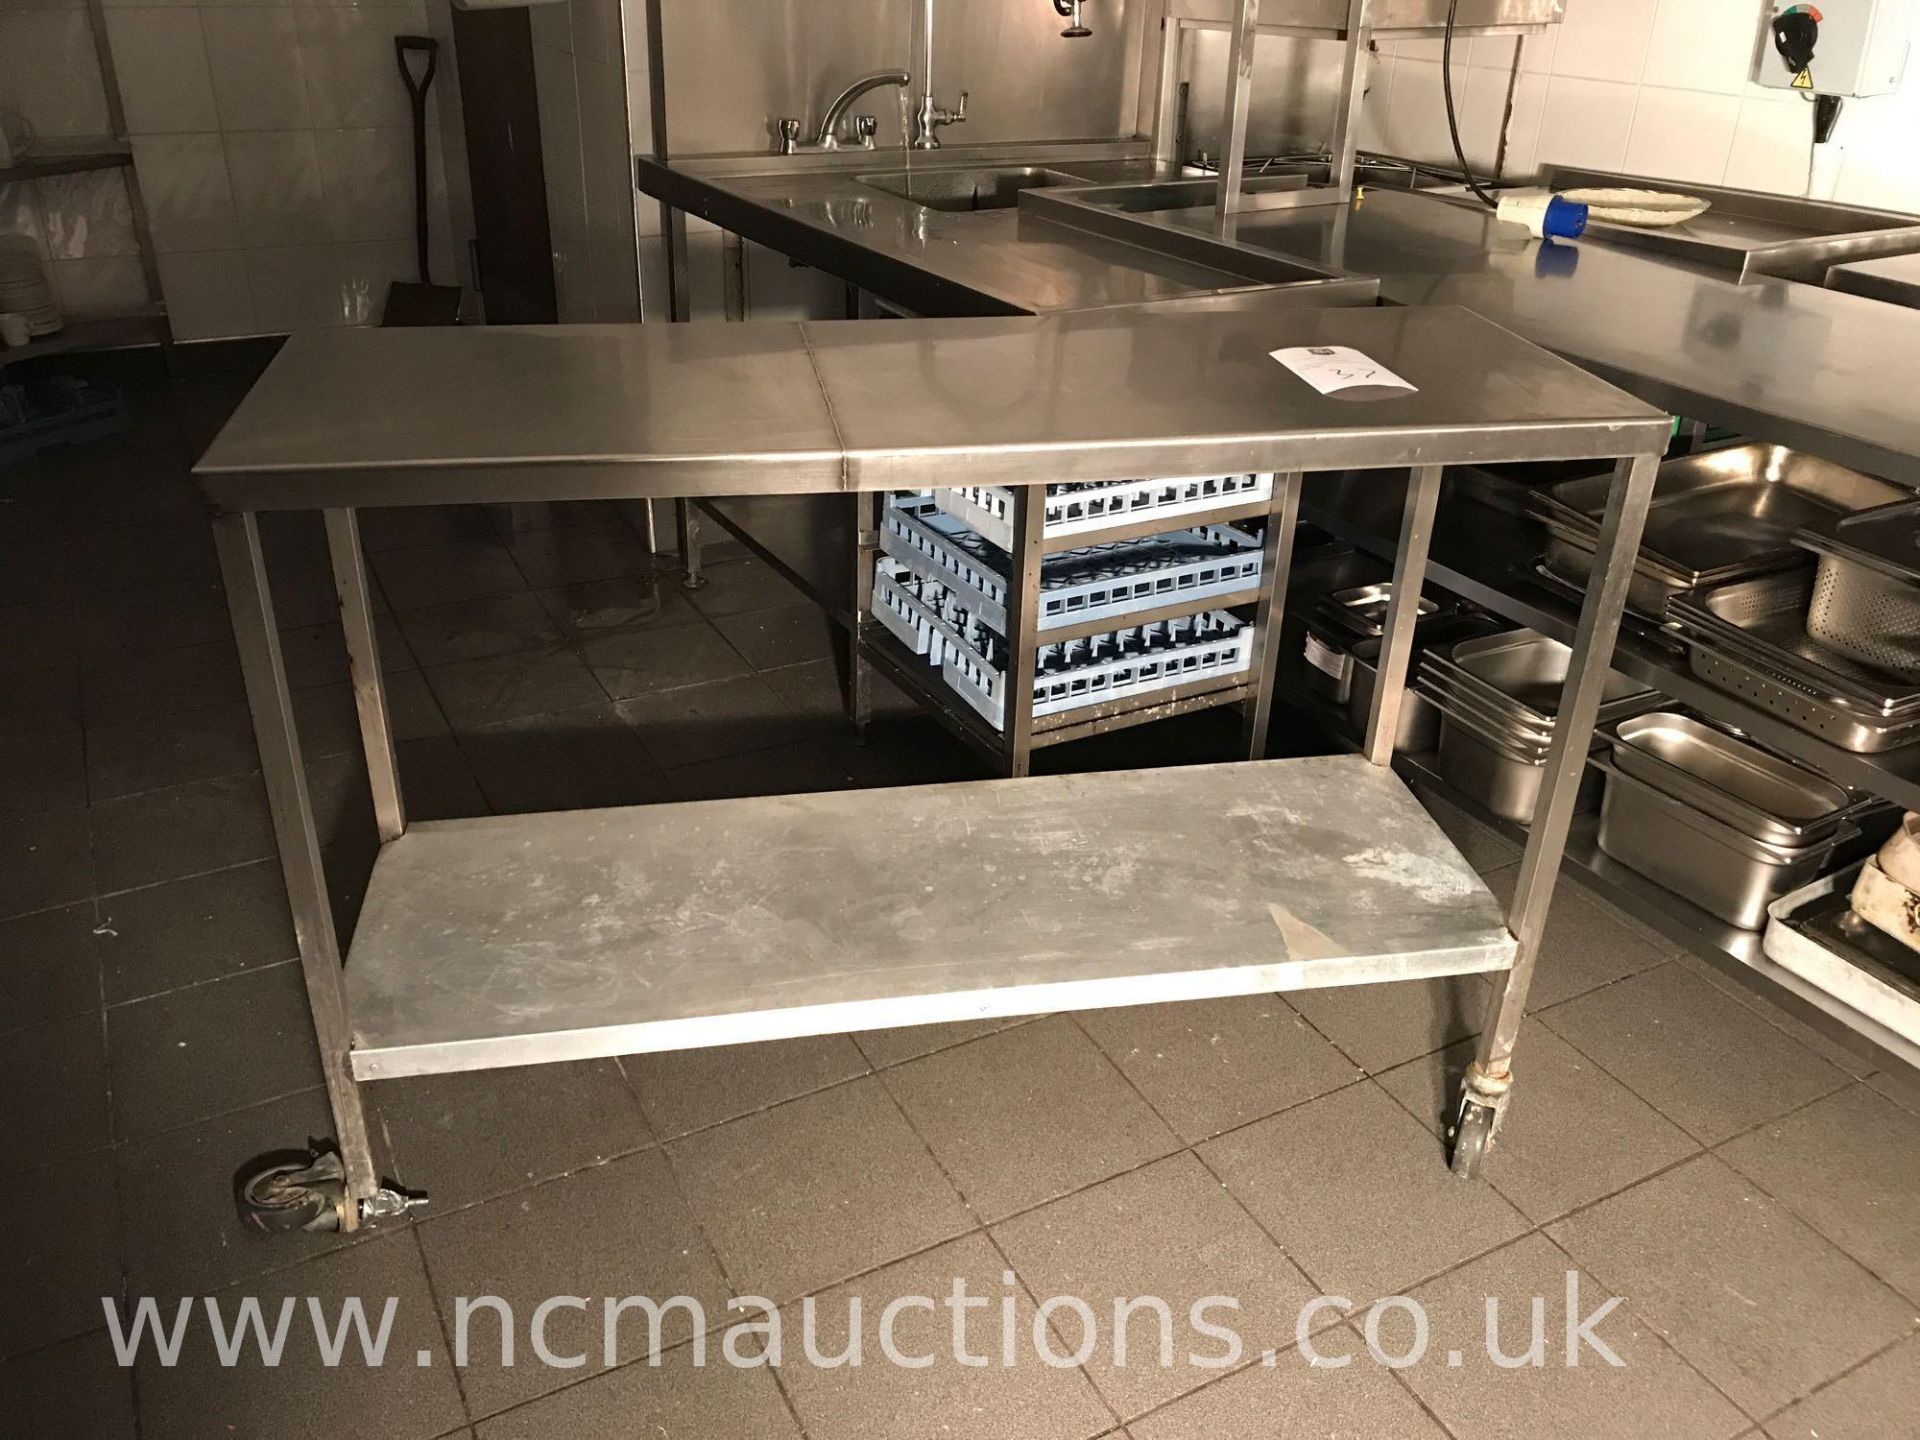 Stainless steel counter (damaged)